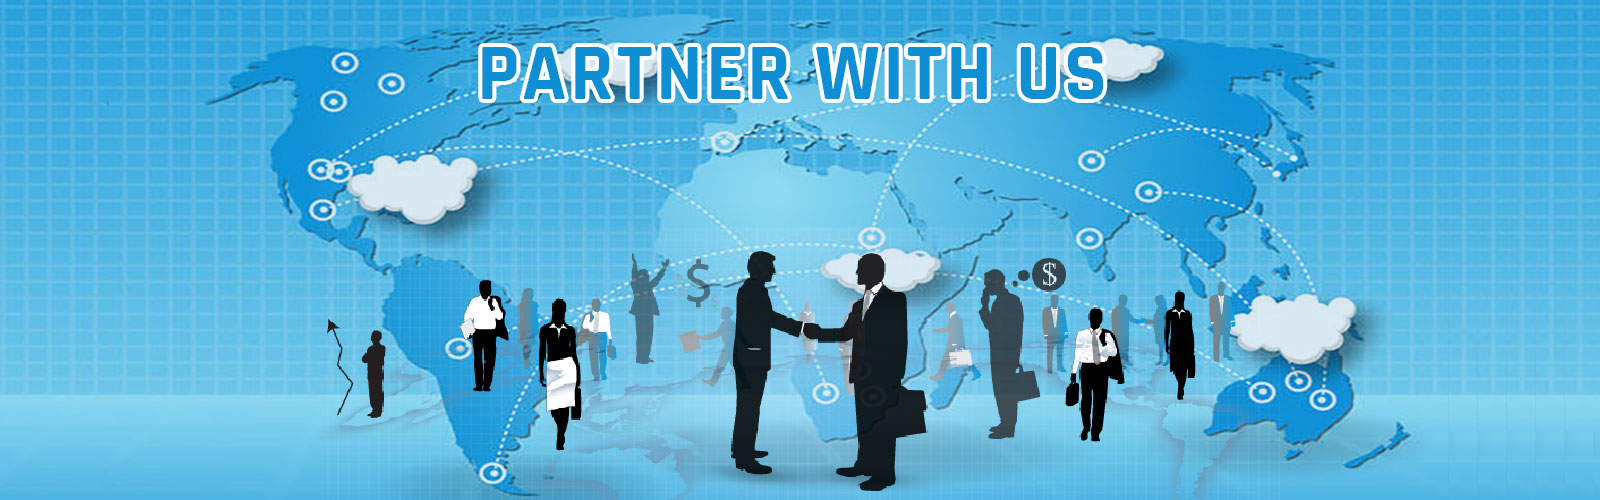 partner_with_us